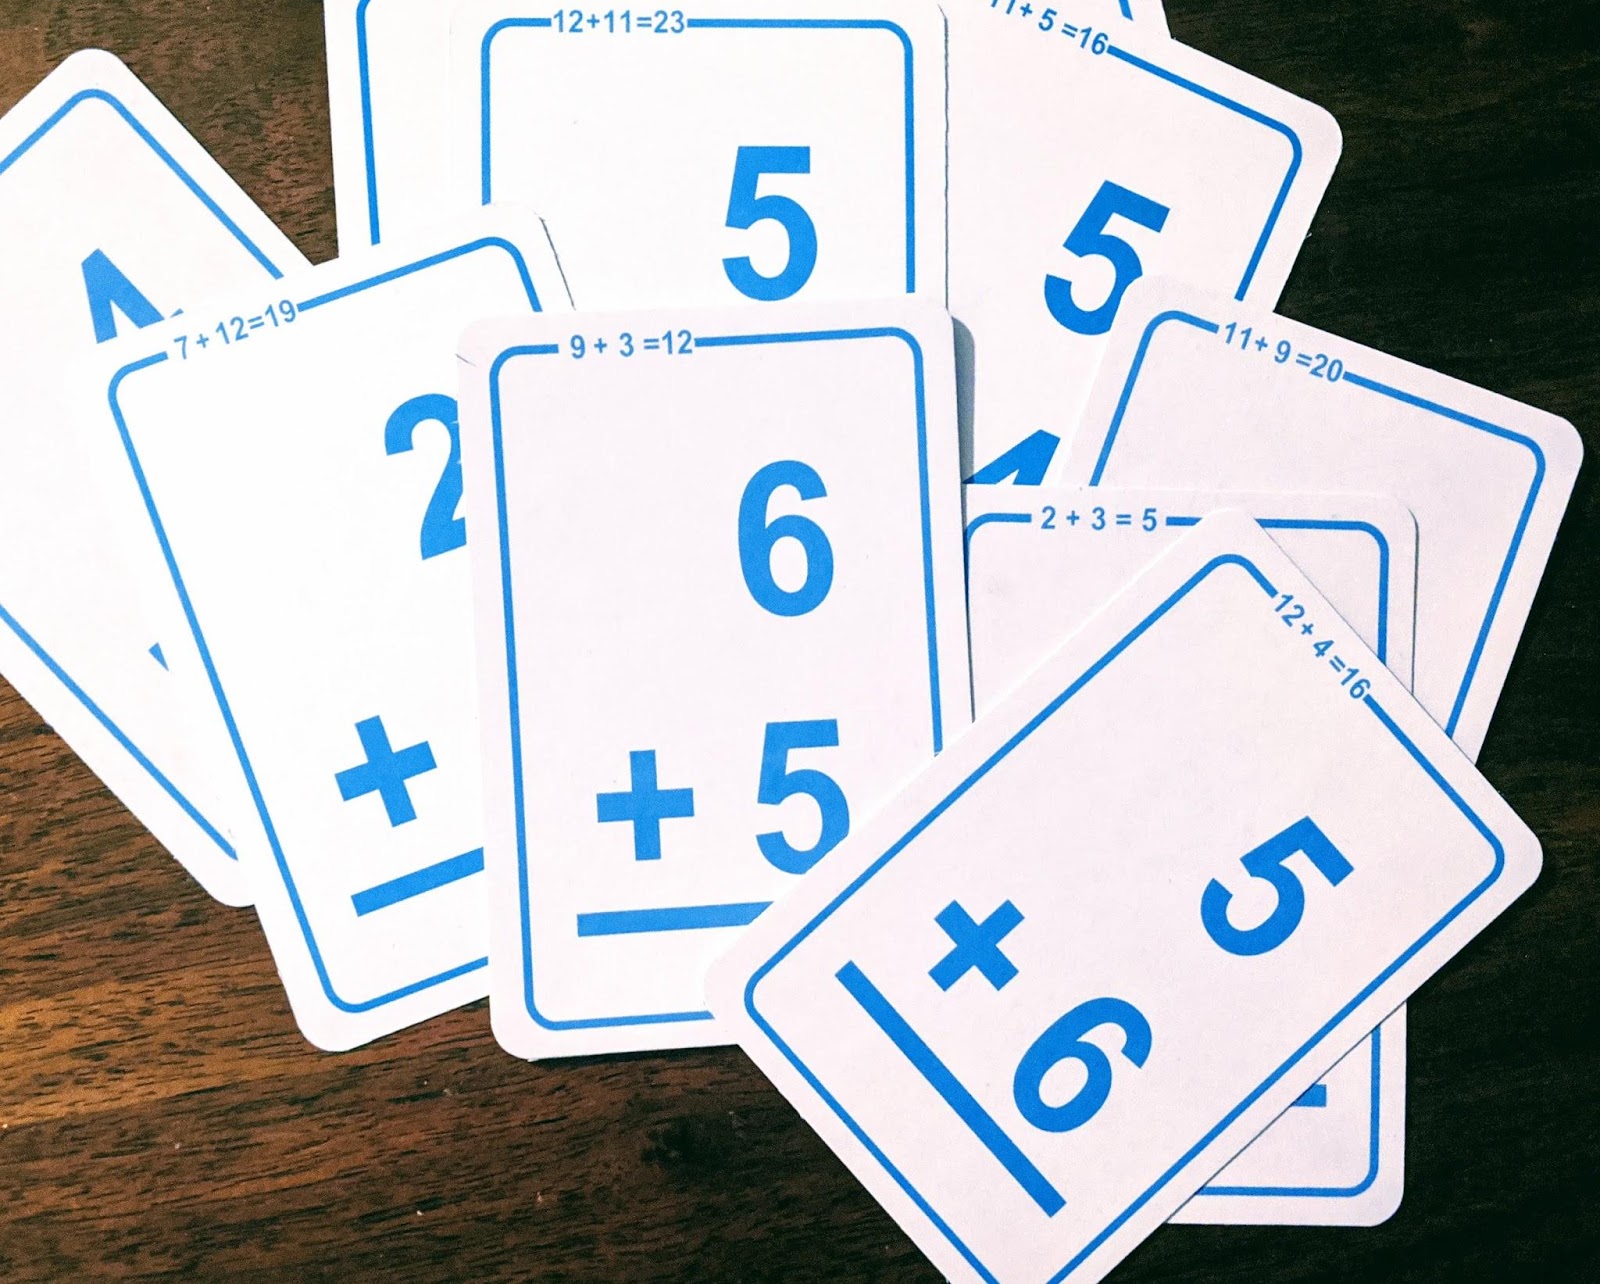 Addition cards spread out